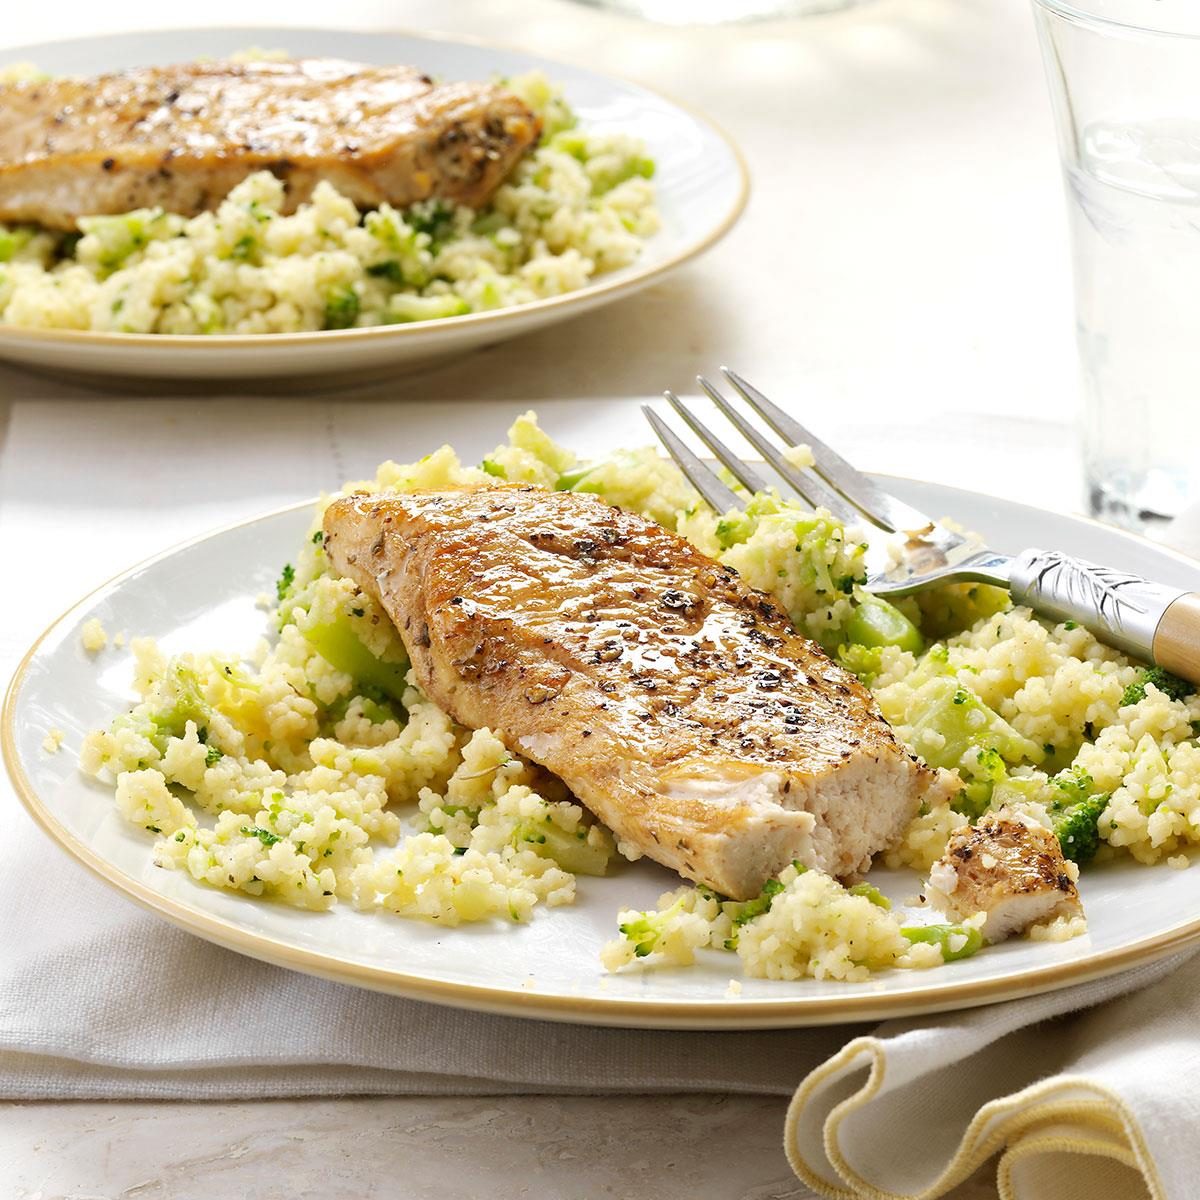 Balsamic Chicken With Broccoli Couscous Exps133770 Sd143205a01 29 5bc Rms 2